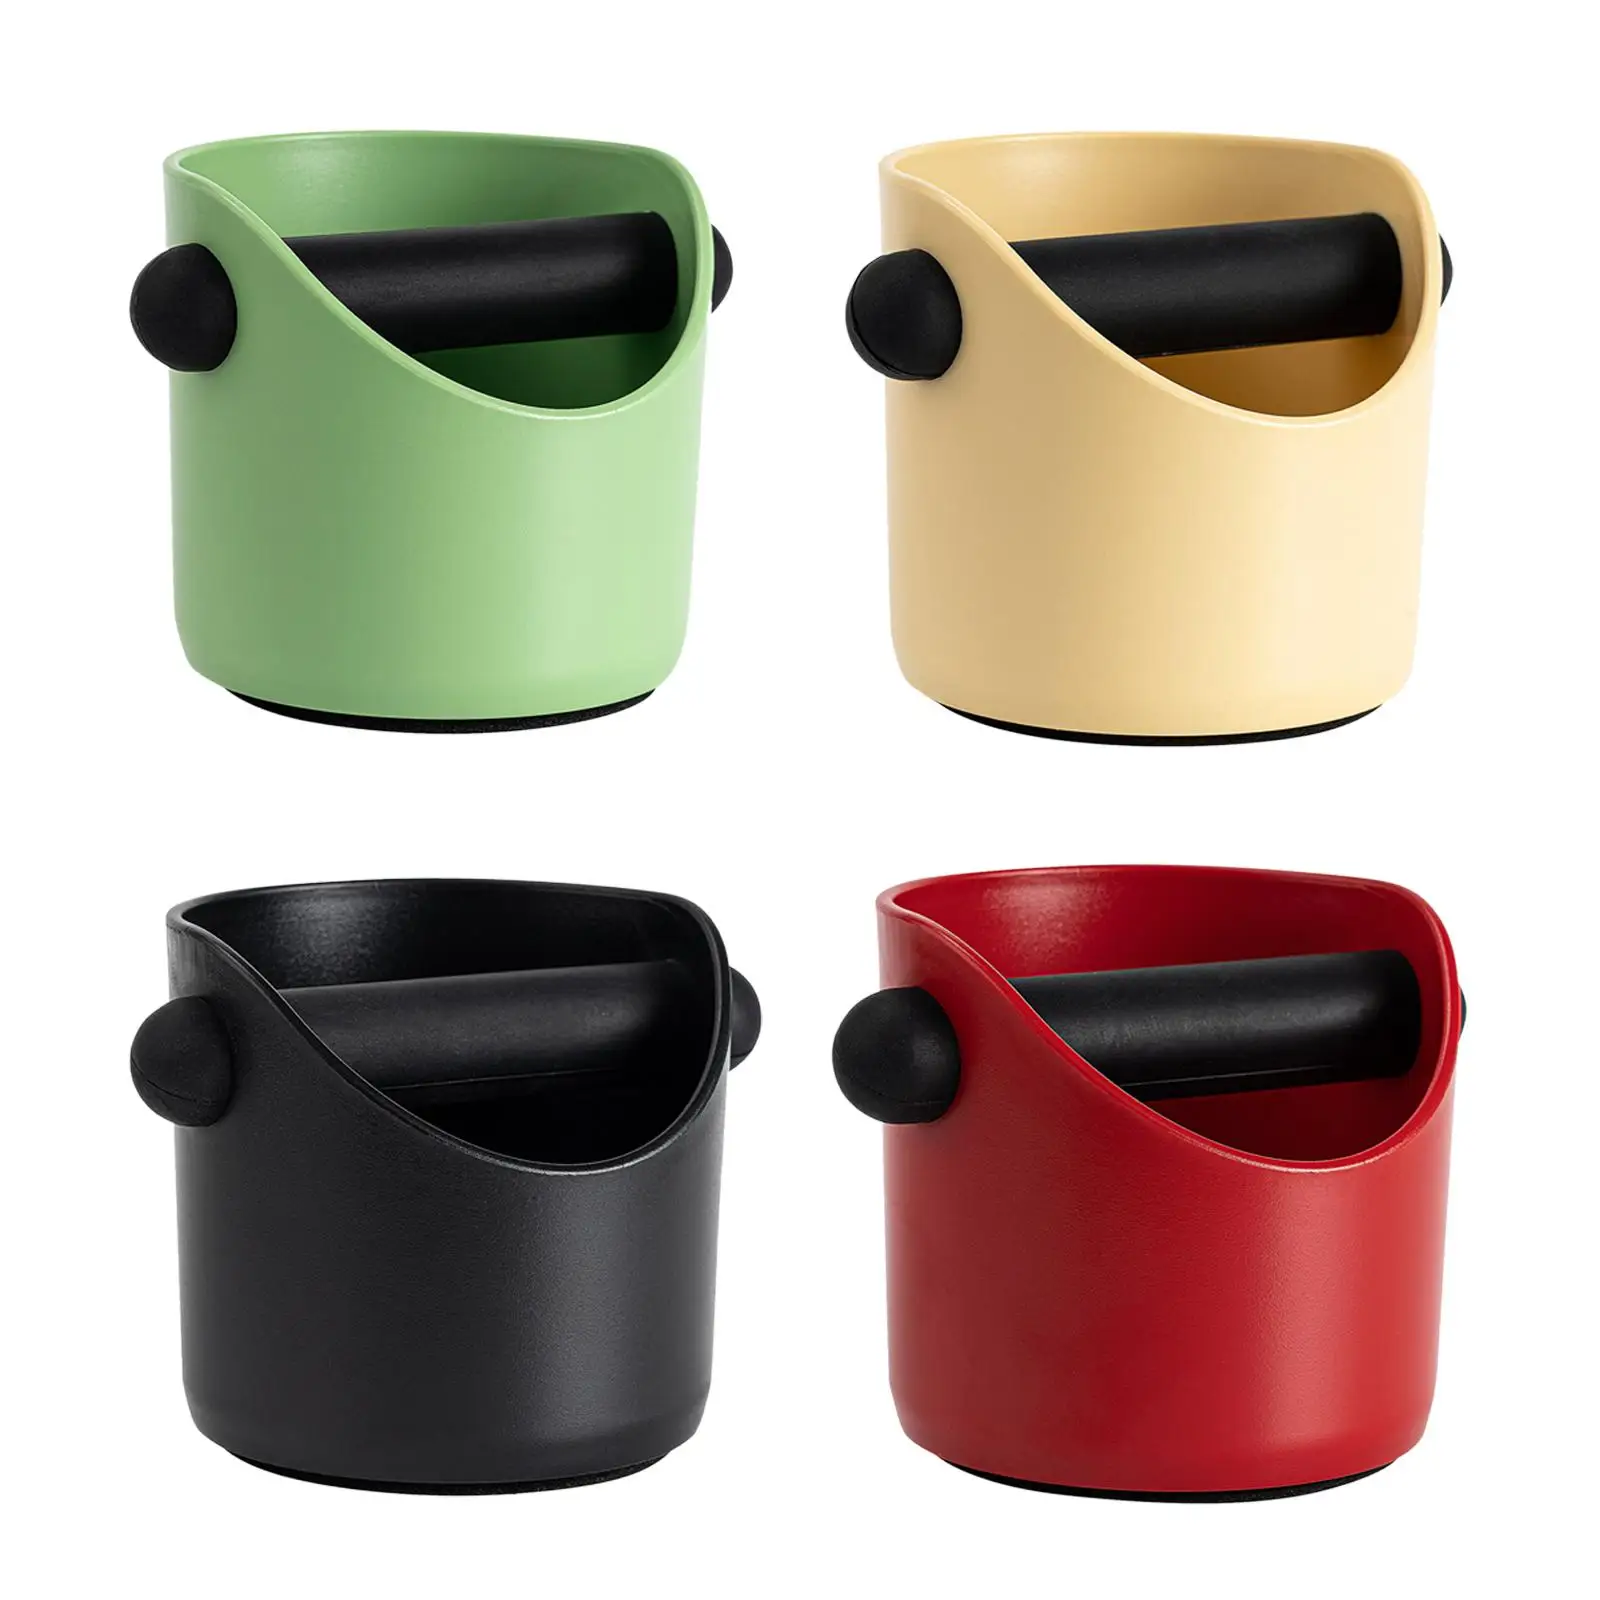 Espresso Dump Bin with Removable Knock Rod Shock Absorbent Trash Can Barista Style Compact Espresso Bucket for Kitchen